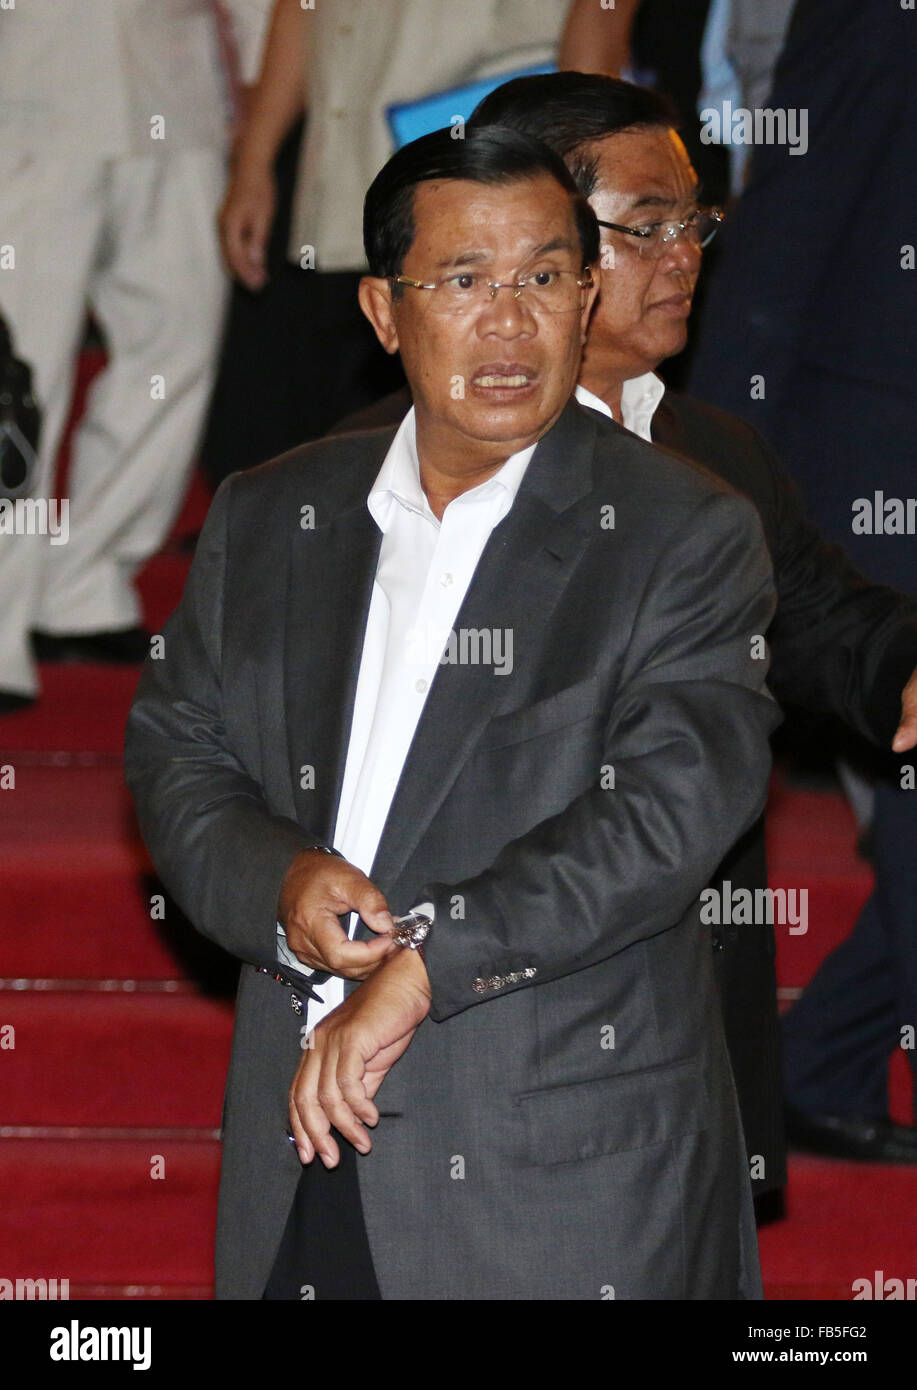 Phnom Penh, Cambodia. 10th Jan, 2016. Cambodian Prime Minister and President of the ruling Cambodian People's Party (CPP) Hun Sen (front) attends the 39th Convention of the CPP's Central Committee in Phnom Penh, Cambodia, Jan. 10, 2016. The CPP on Sunday vowed to continue upholding peace, political stability, and security, while boosting economic development and reducing poverty, according to its communique. © Sovannara/Xinhua/Alamy Live News Stock Photo